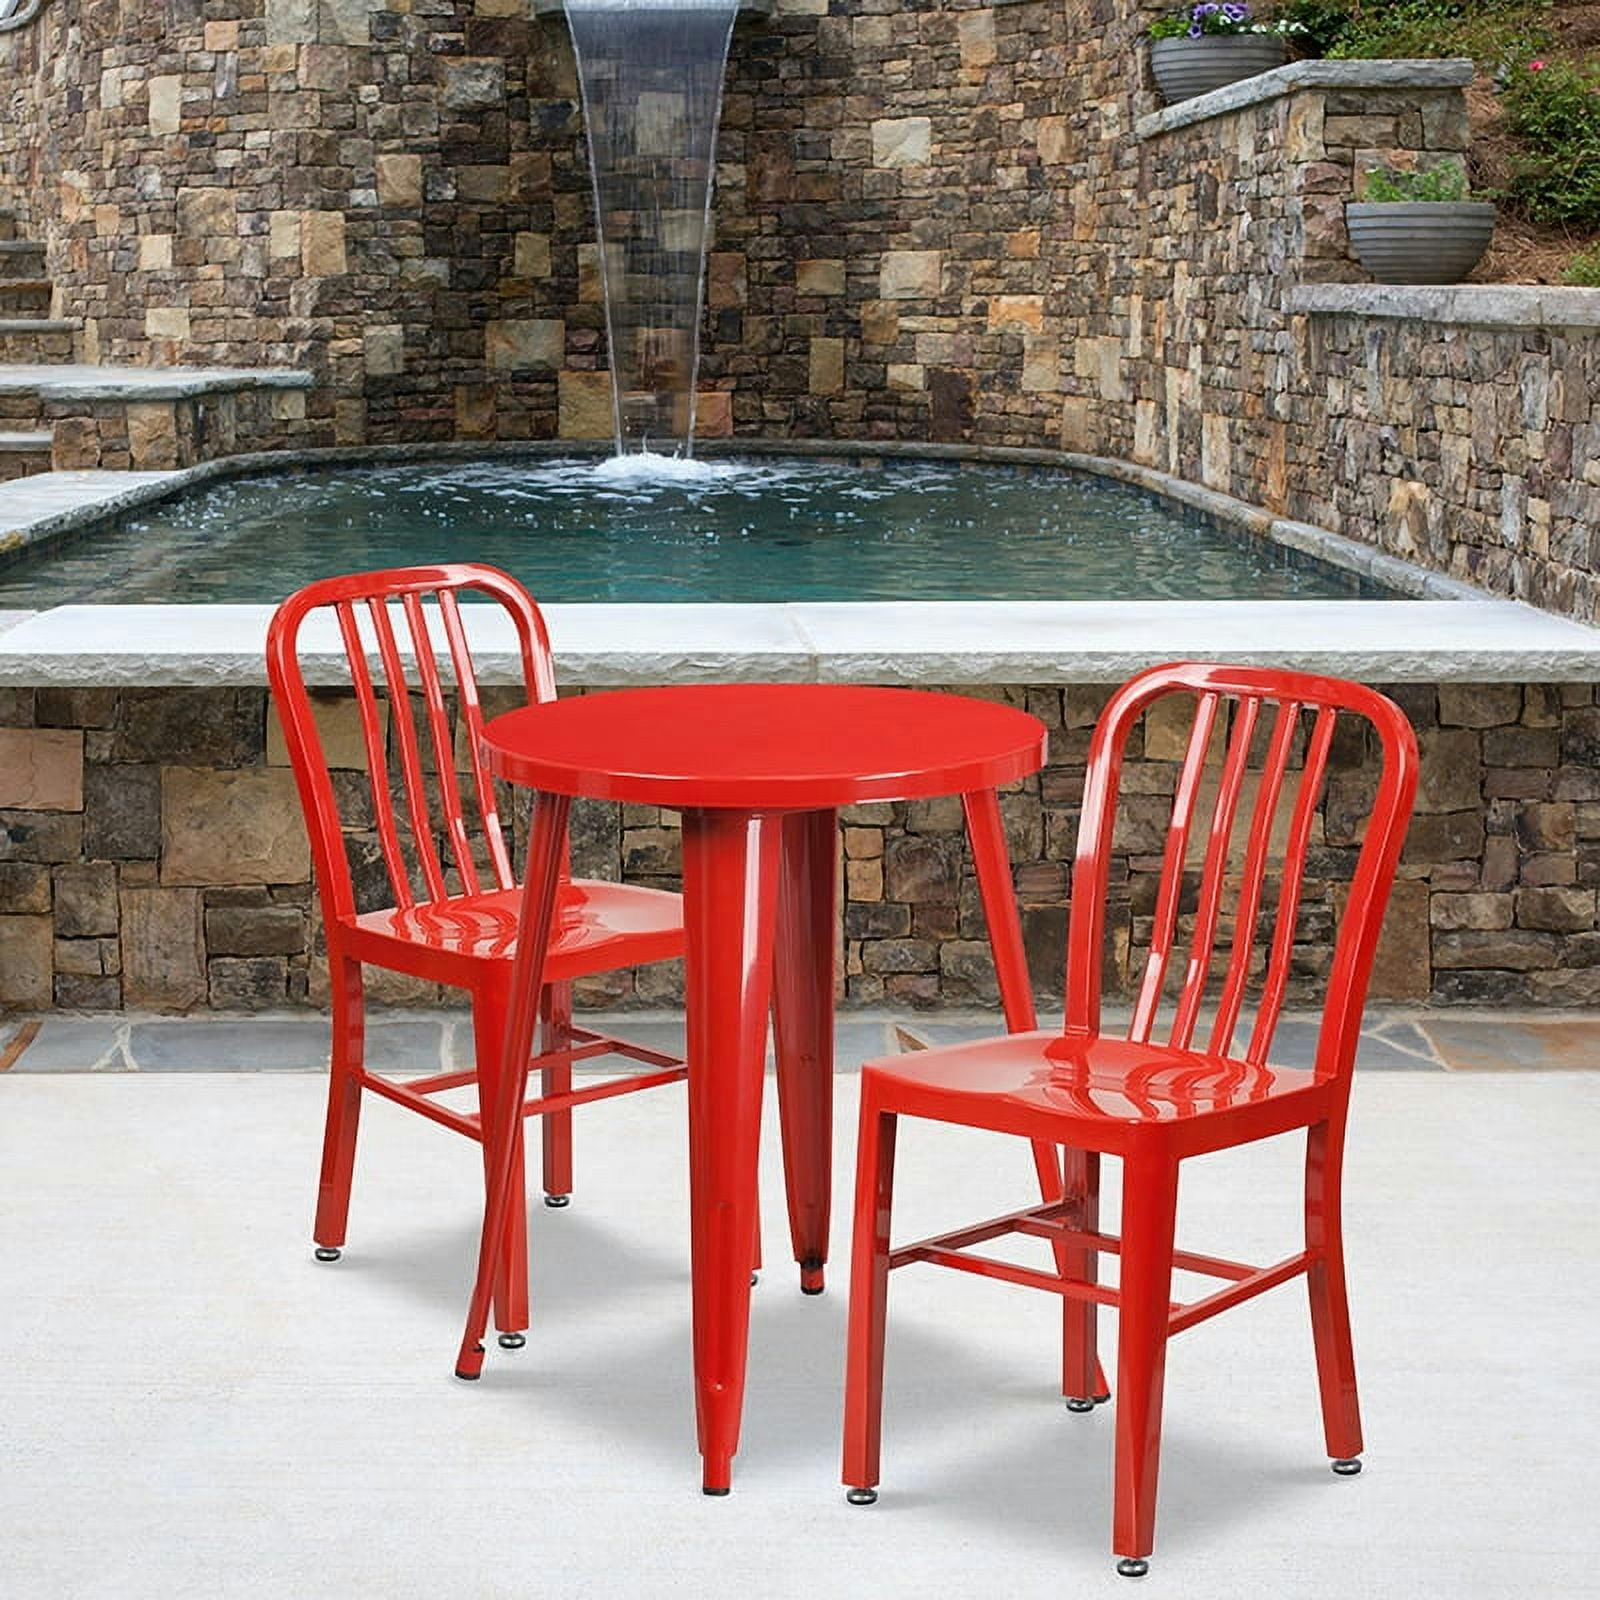 Chic Retro-Modern 24" Round Metal Table and Chair Set in Red